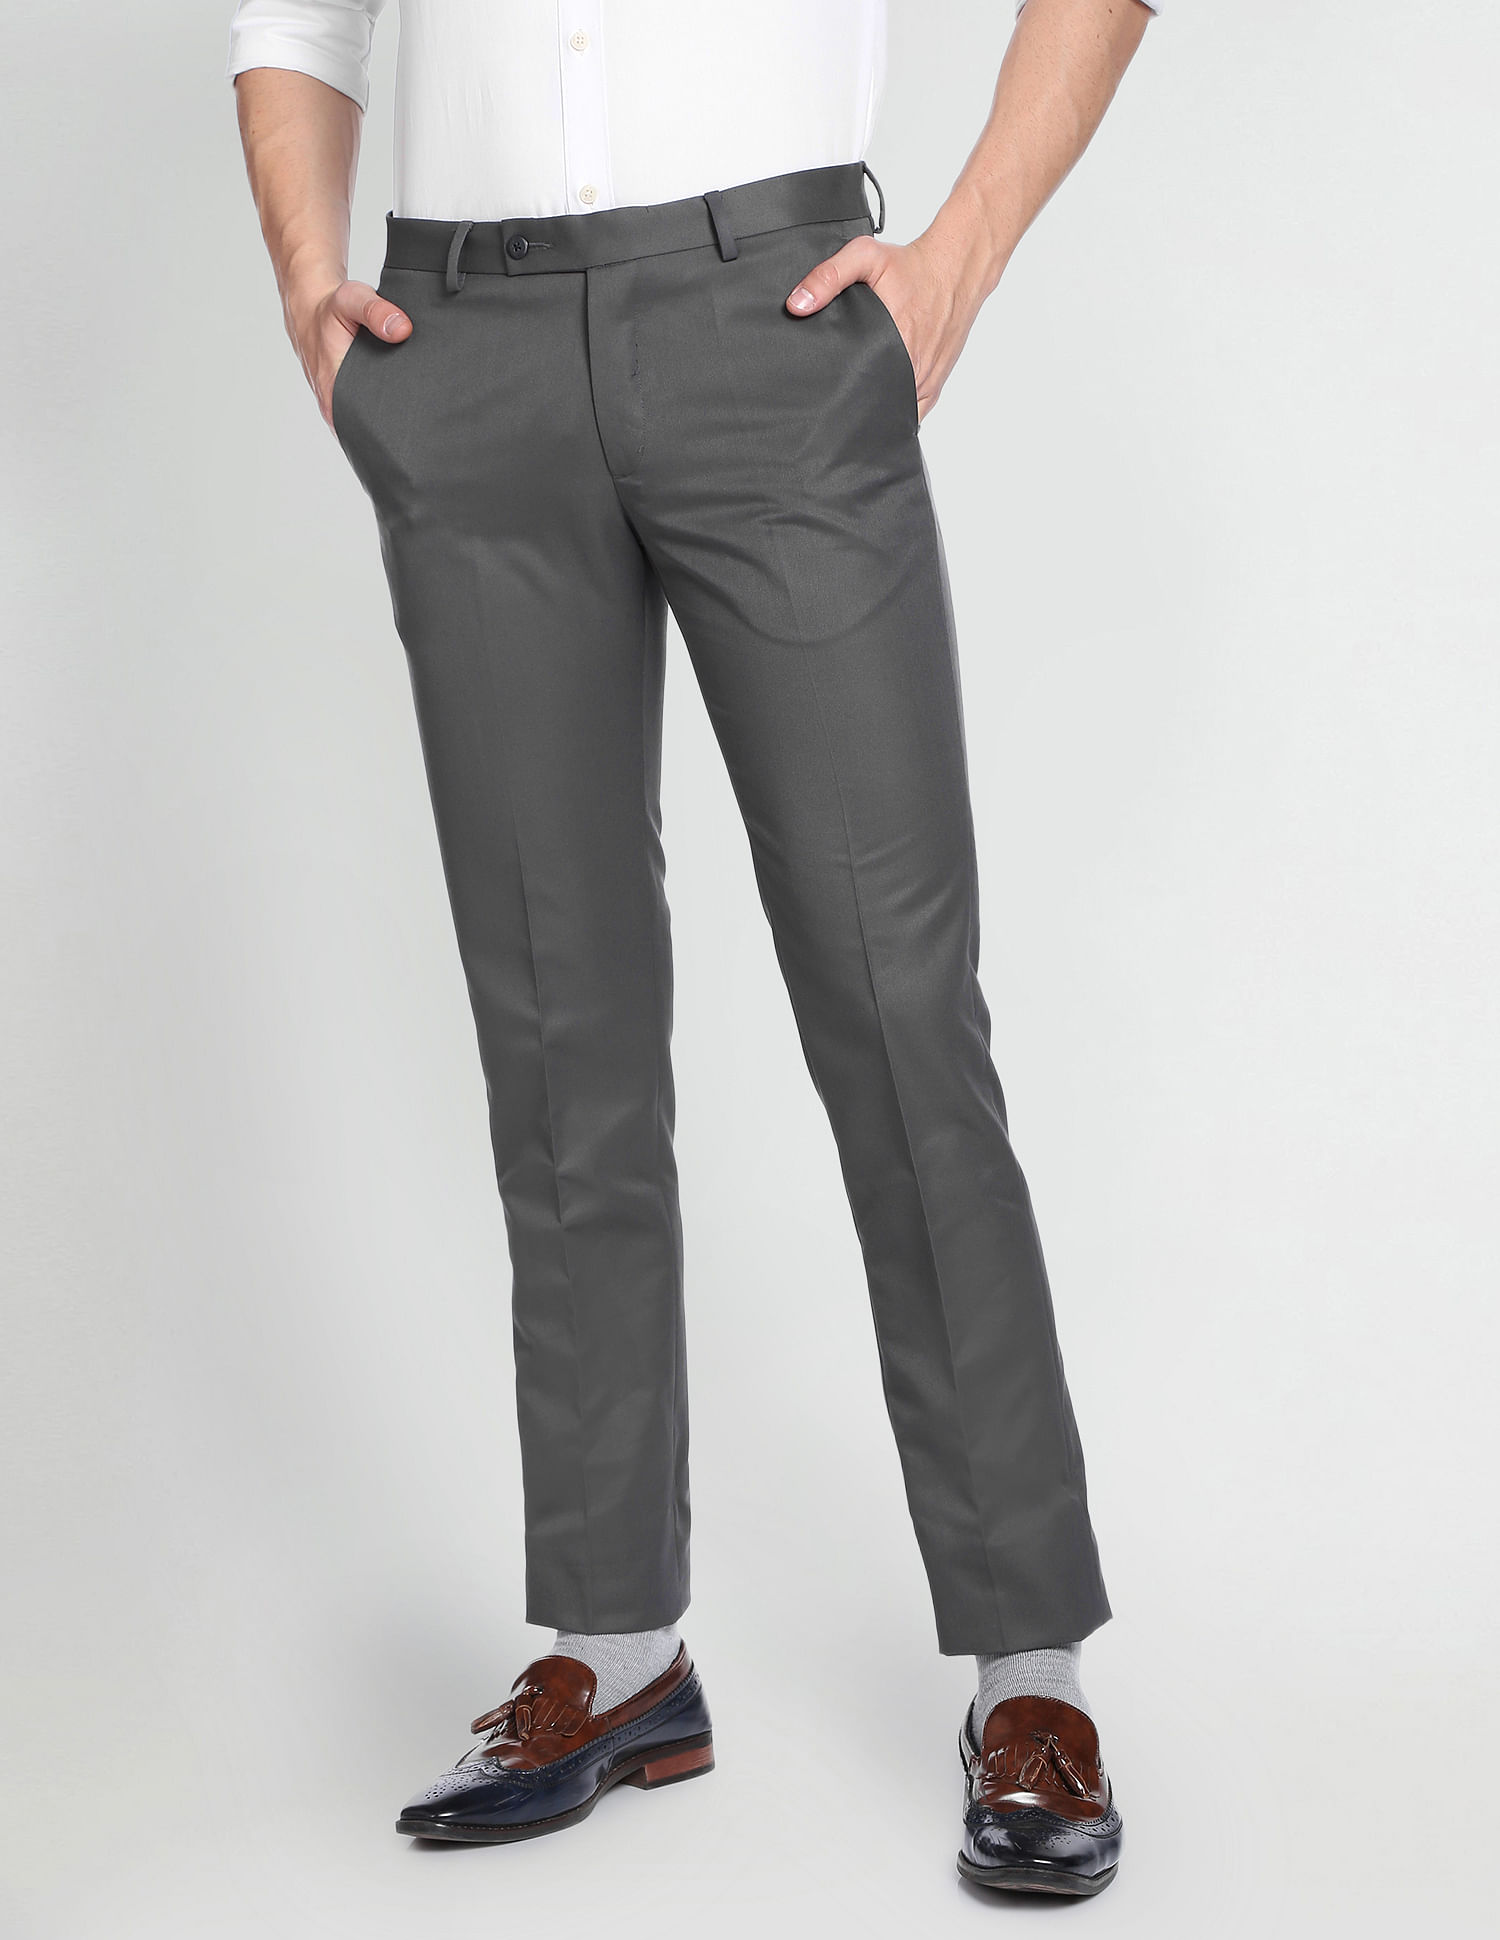 Buy Arrow Tailored Twill Formal Trousers - NNNOW.com